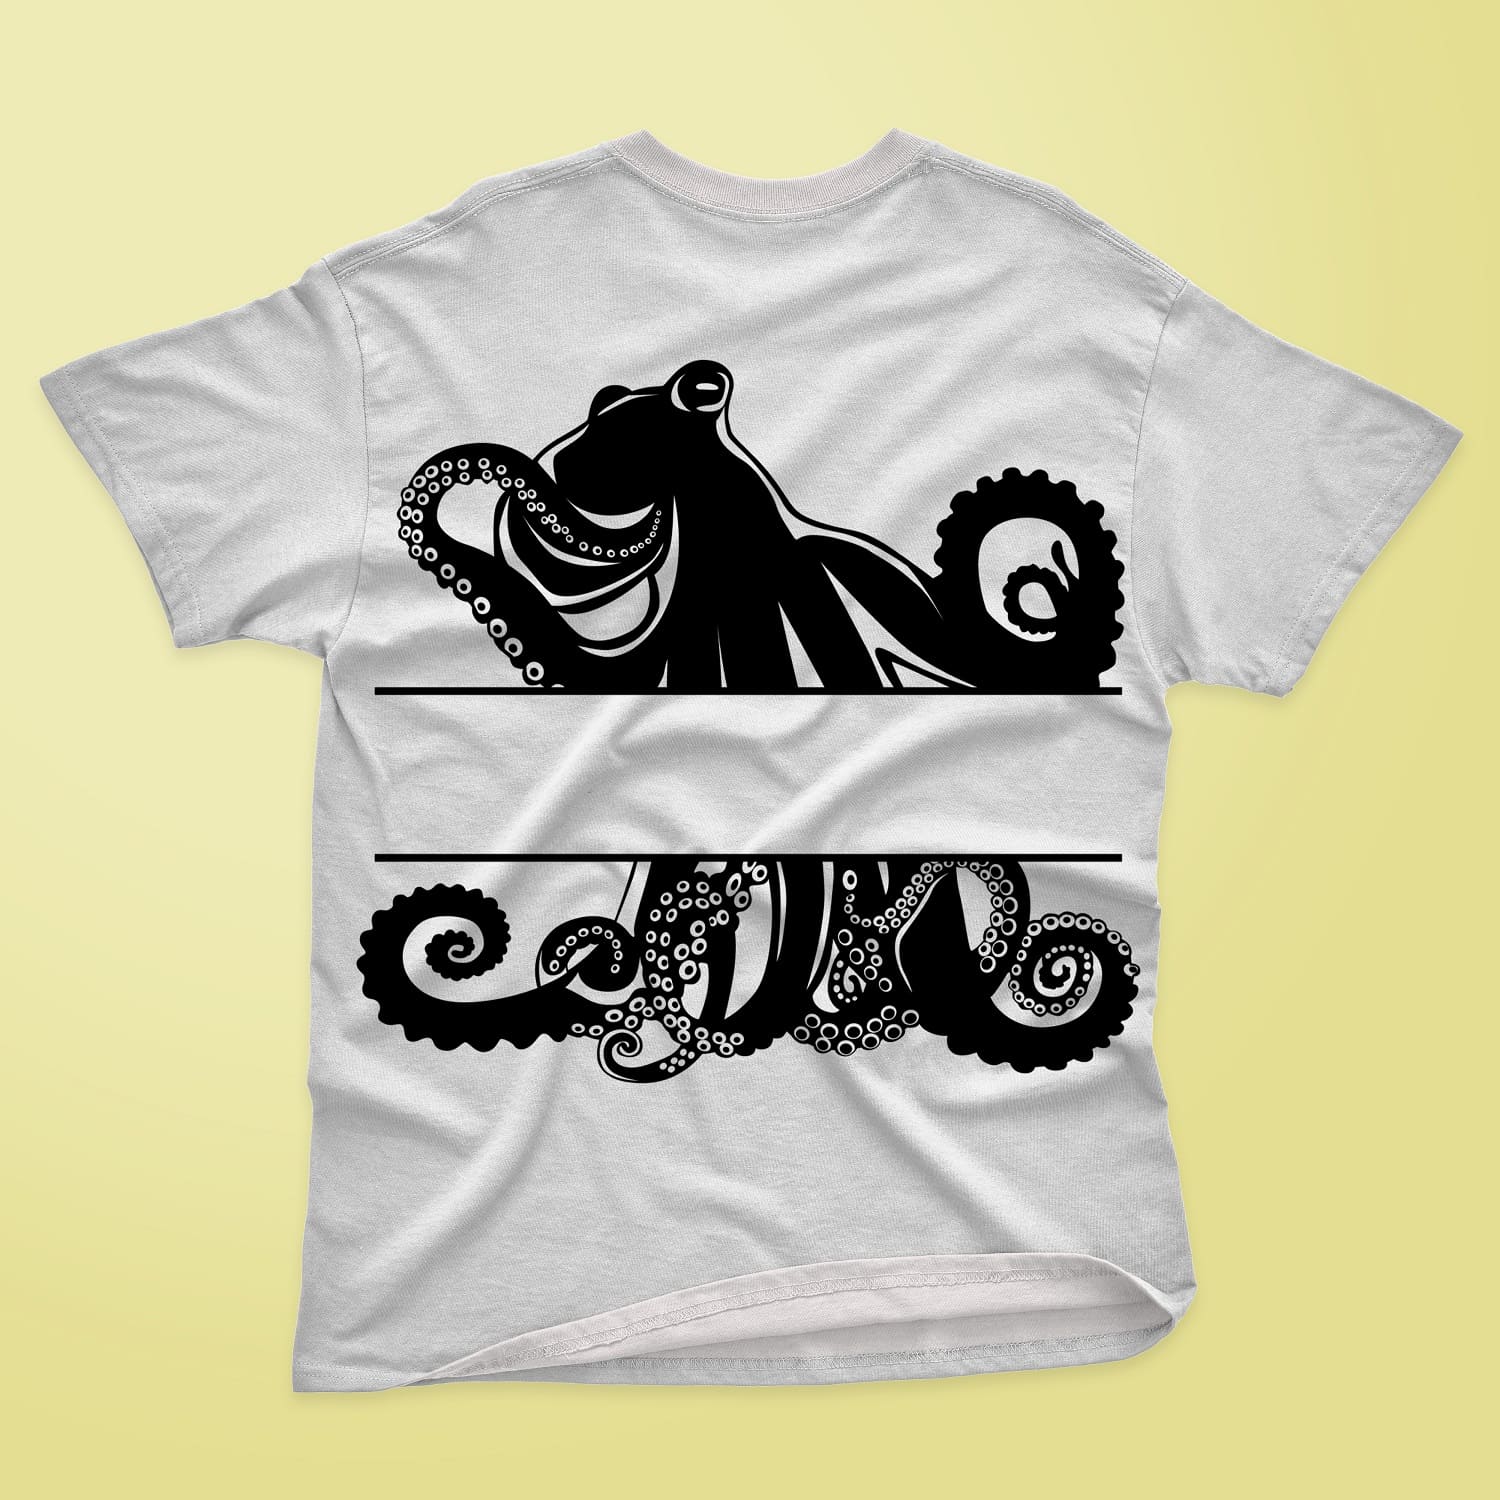 T-shirt with black tentacled Monogram Octopus.